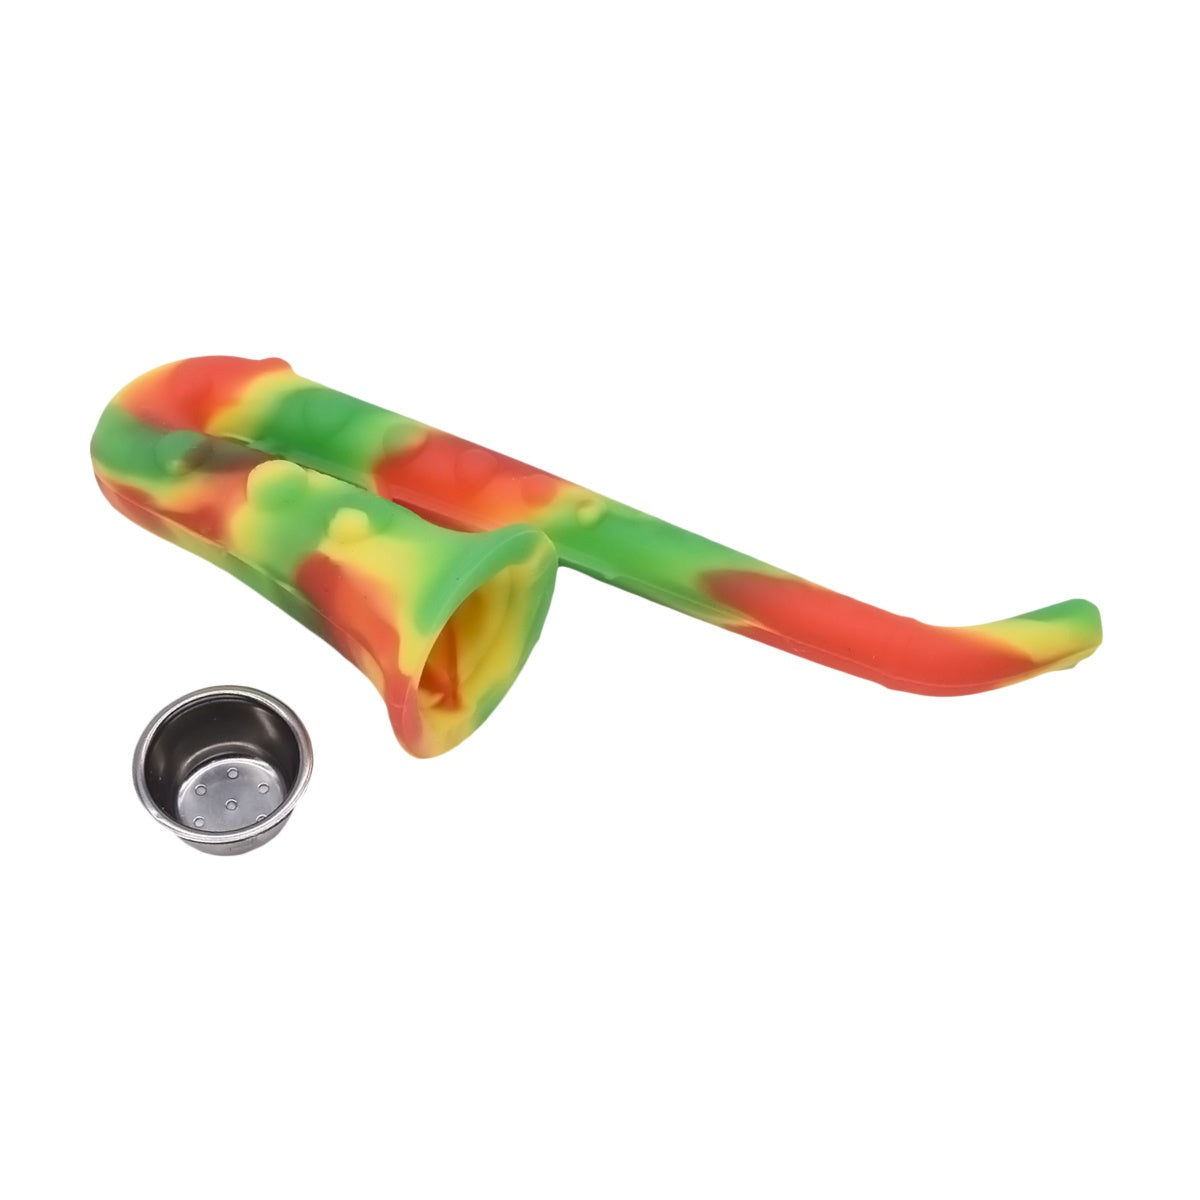 Silicone Unbreakable Smoking Pipe, Tobacco Pipes with Steel Bowl, Red Green